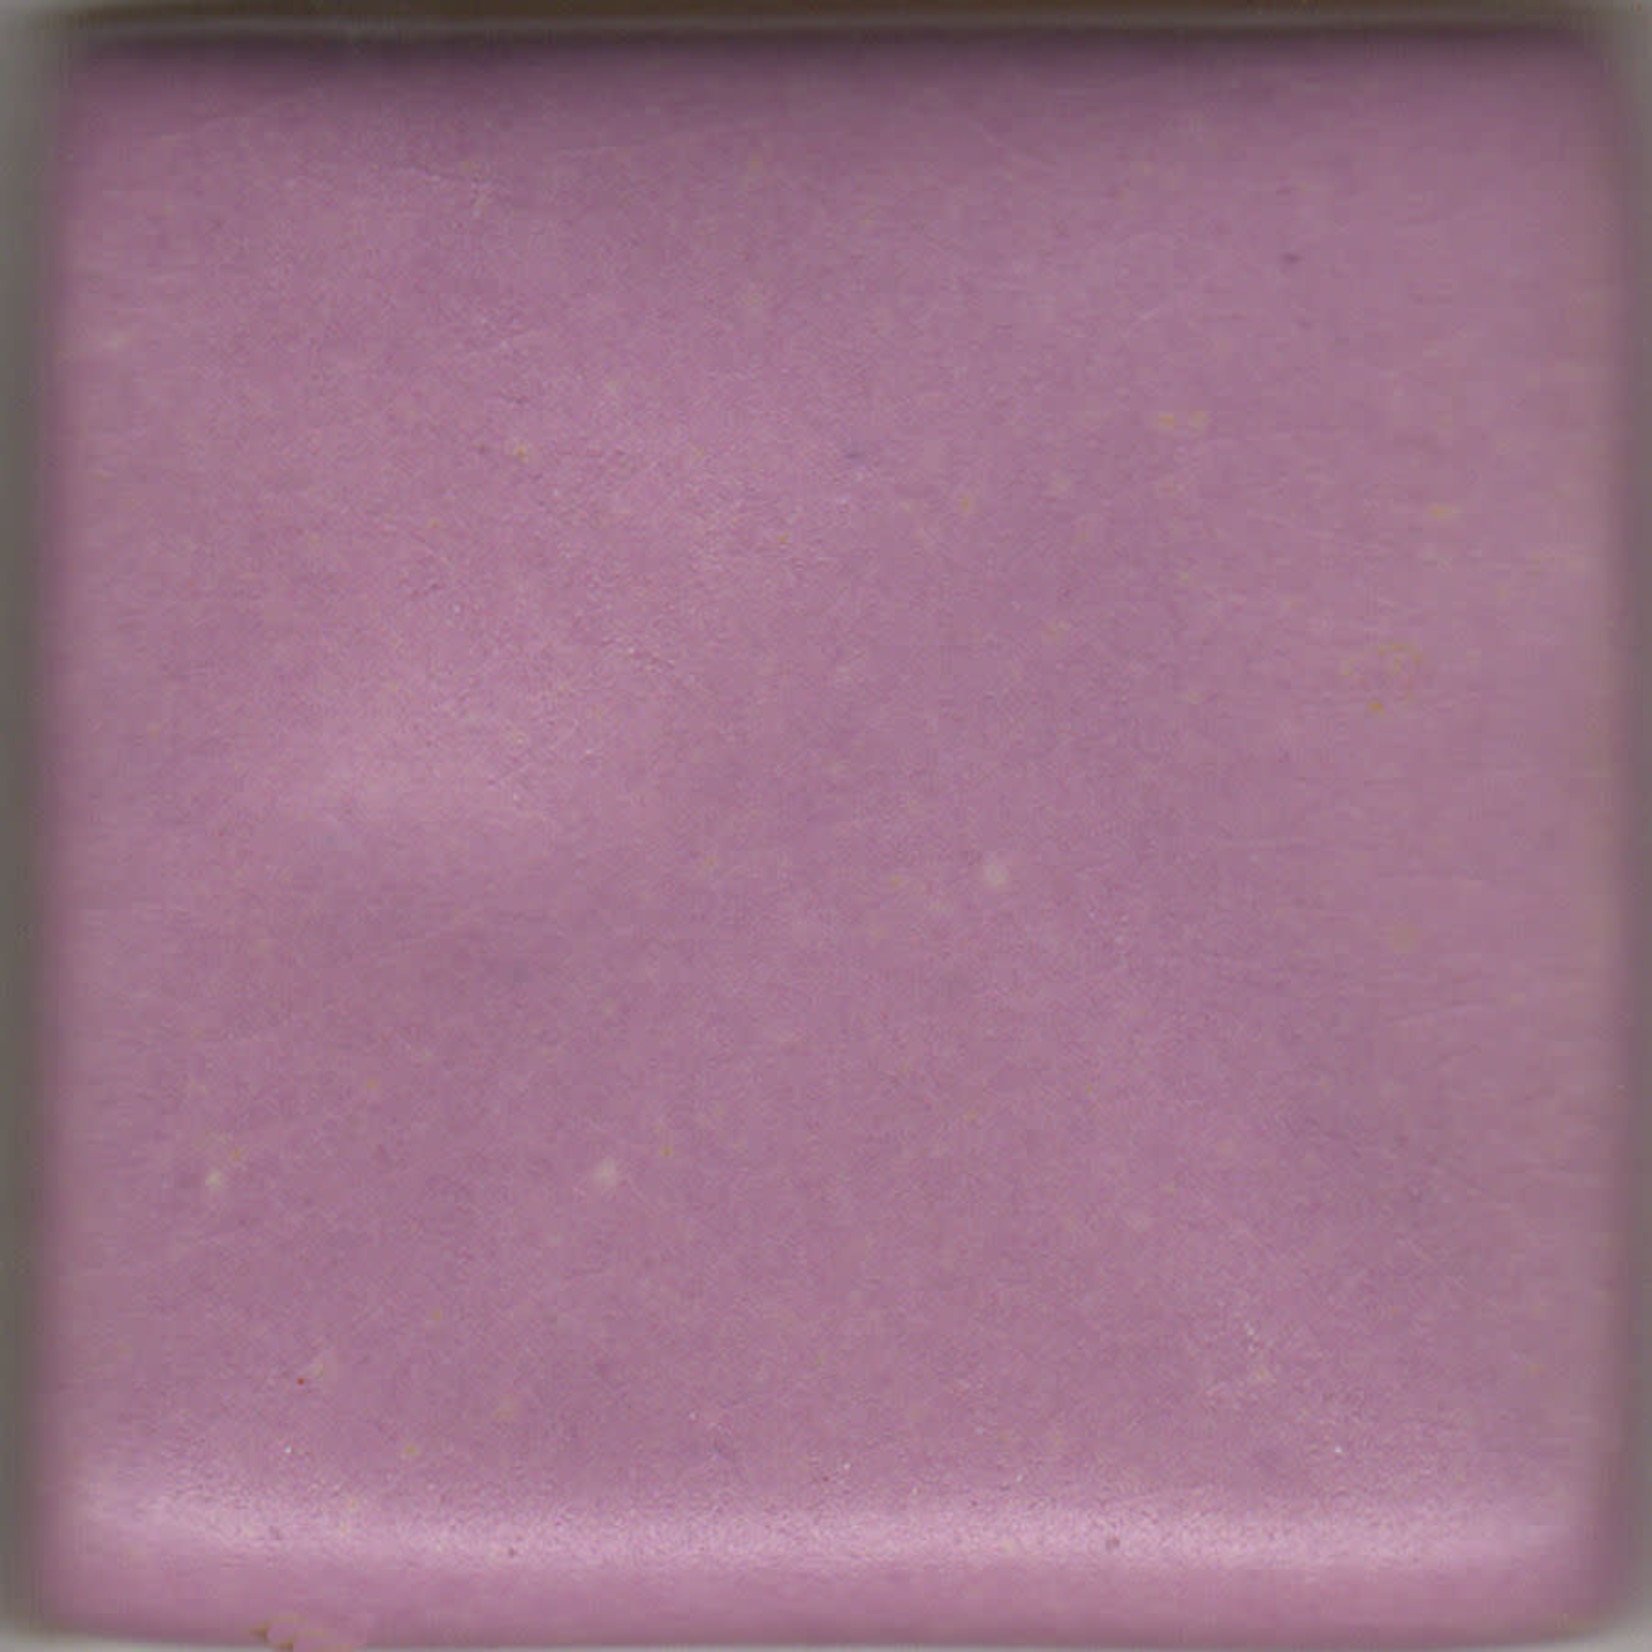 Coyote MBG084 - Orchid Satin ^4-6 (Pint)